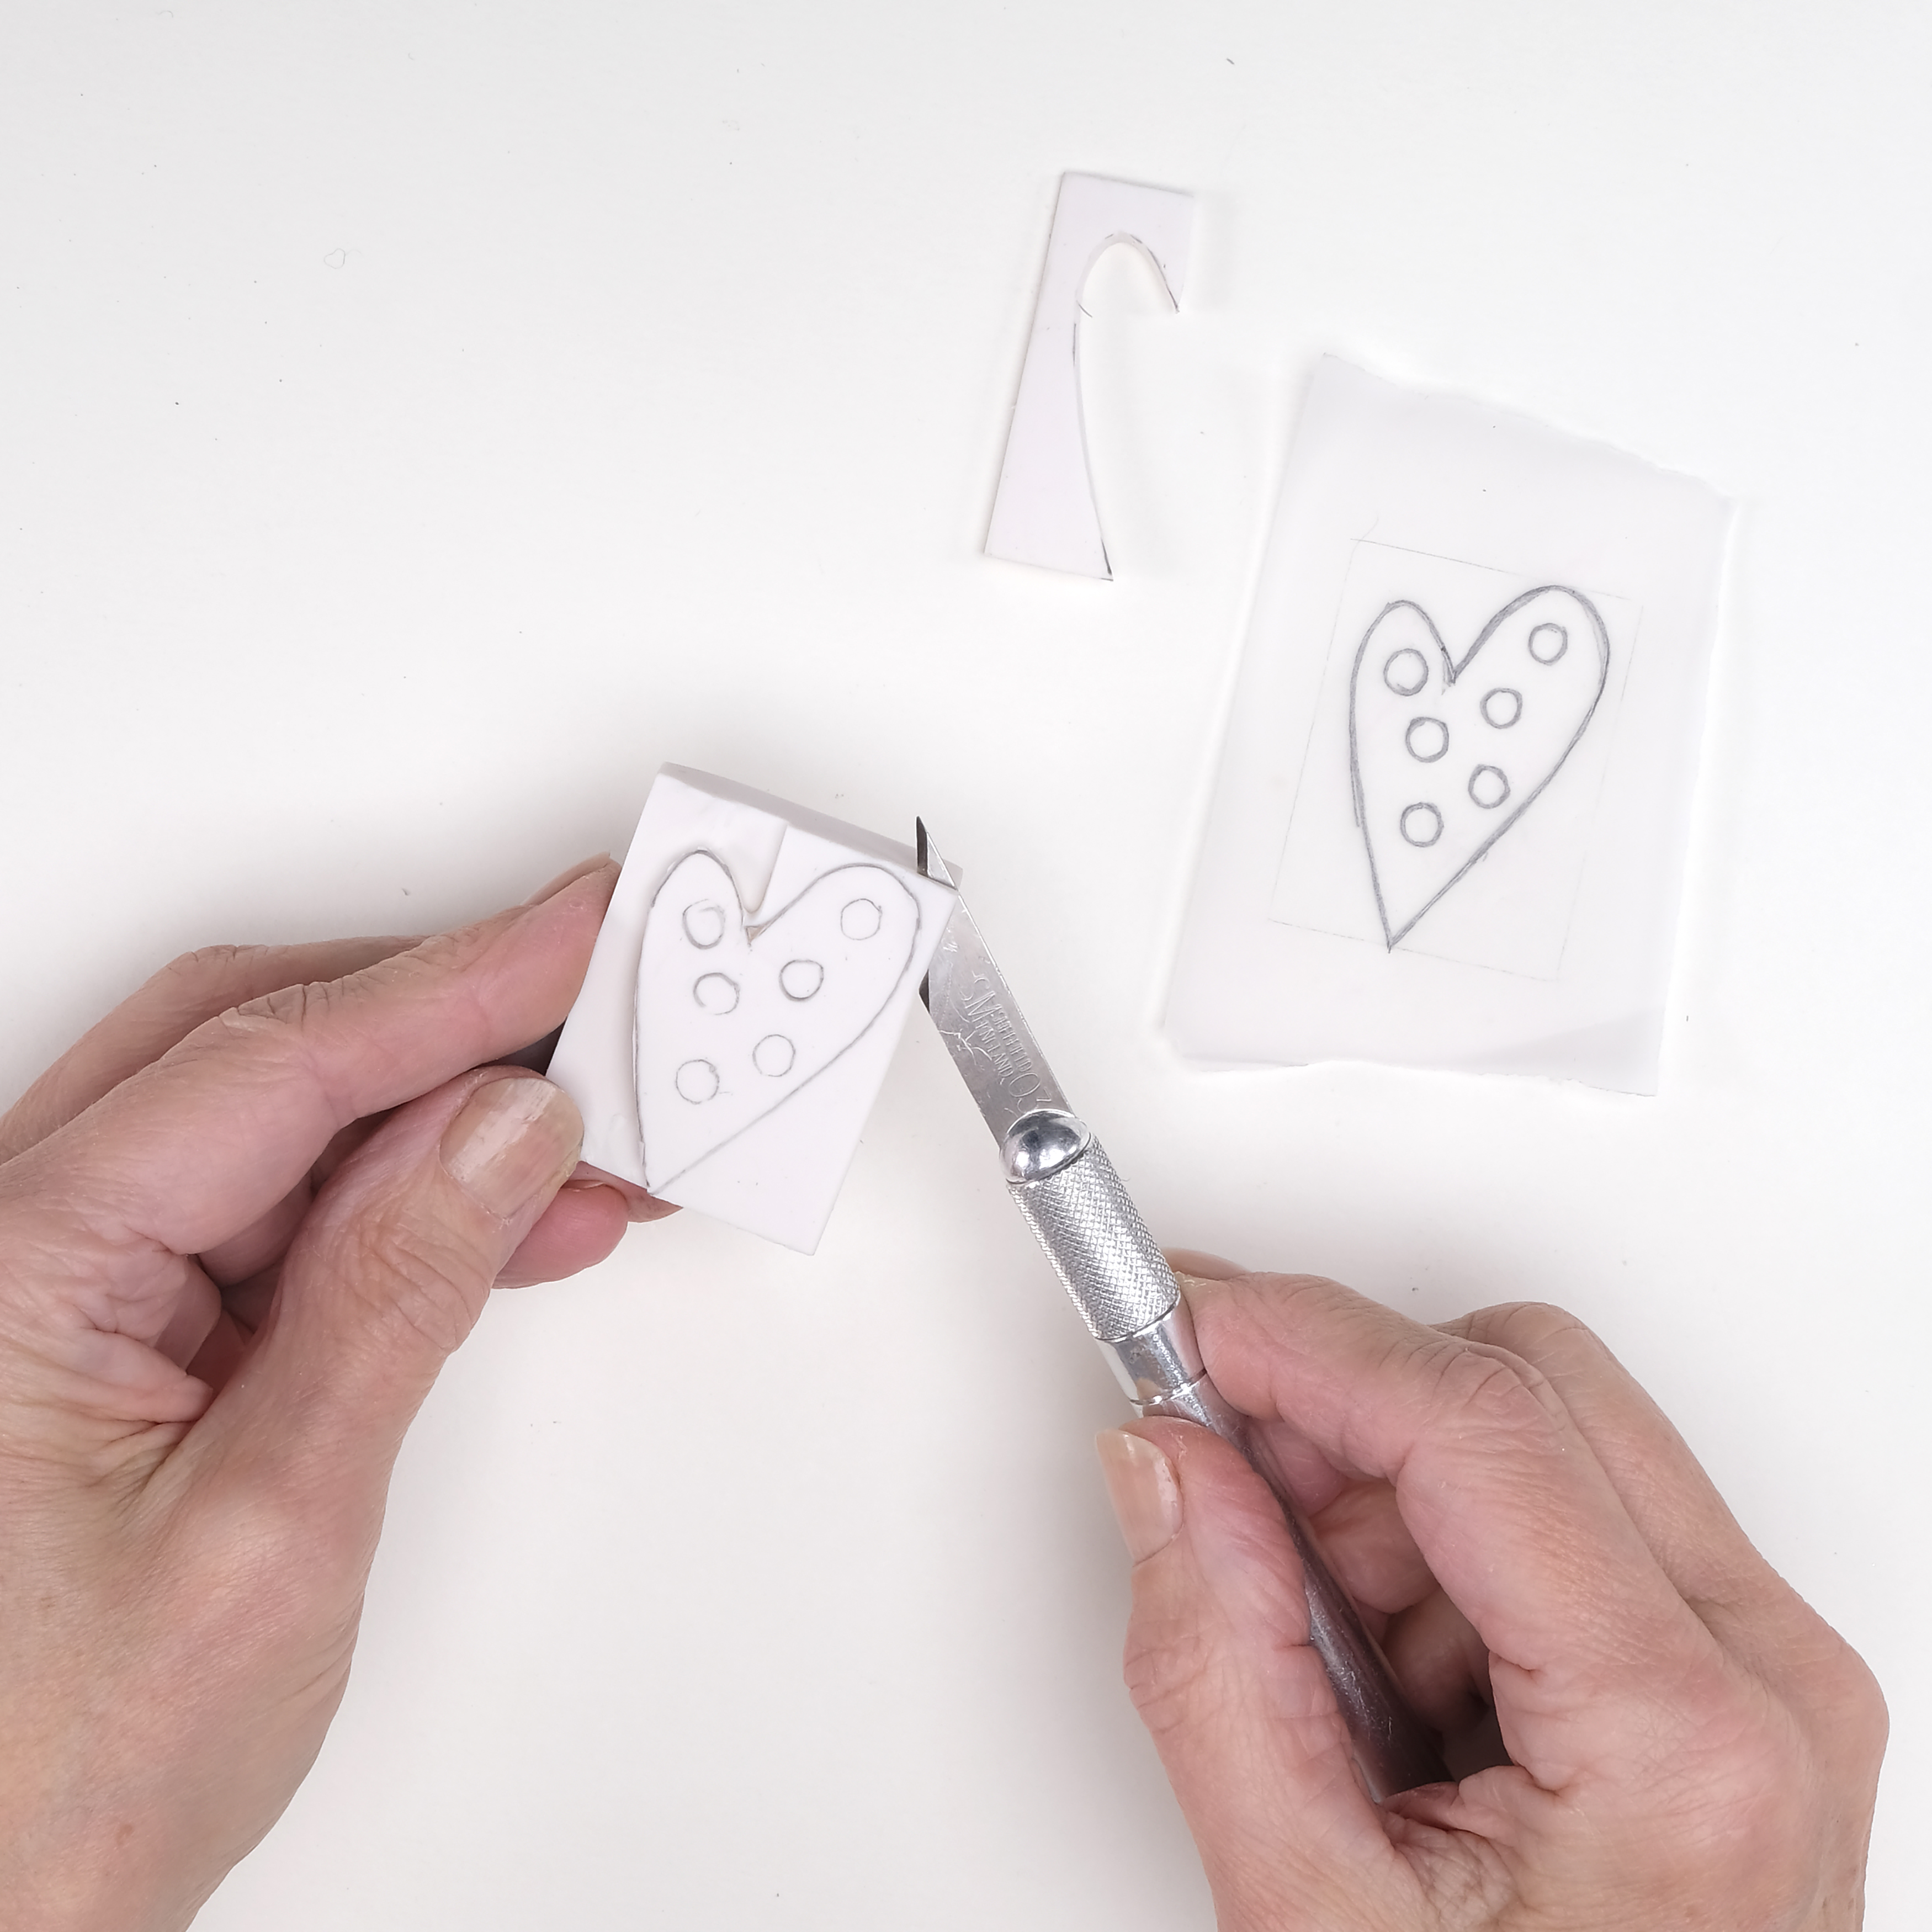 How to make a rubber stamp – step 1